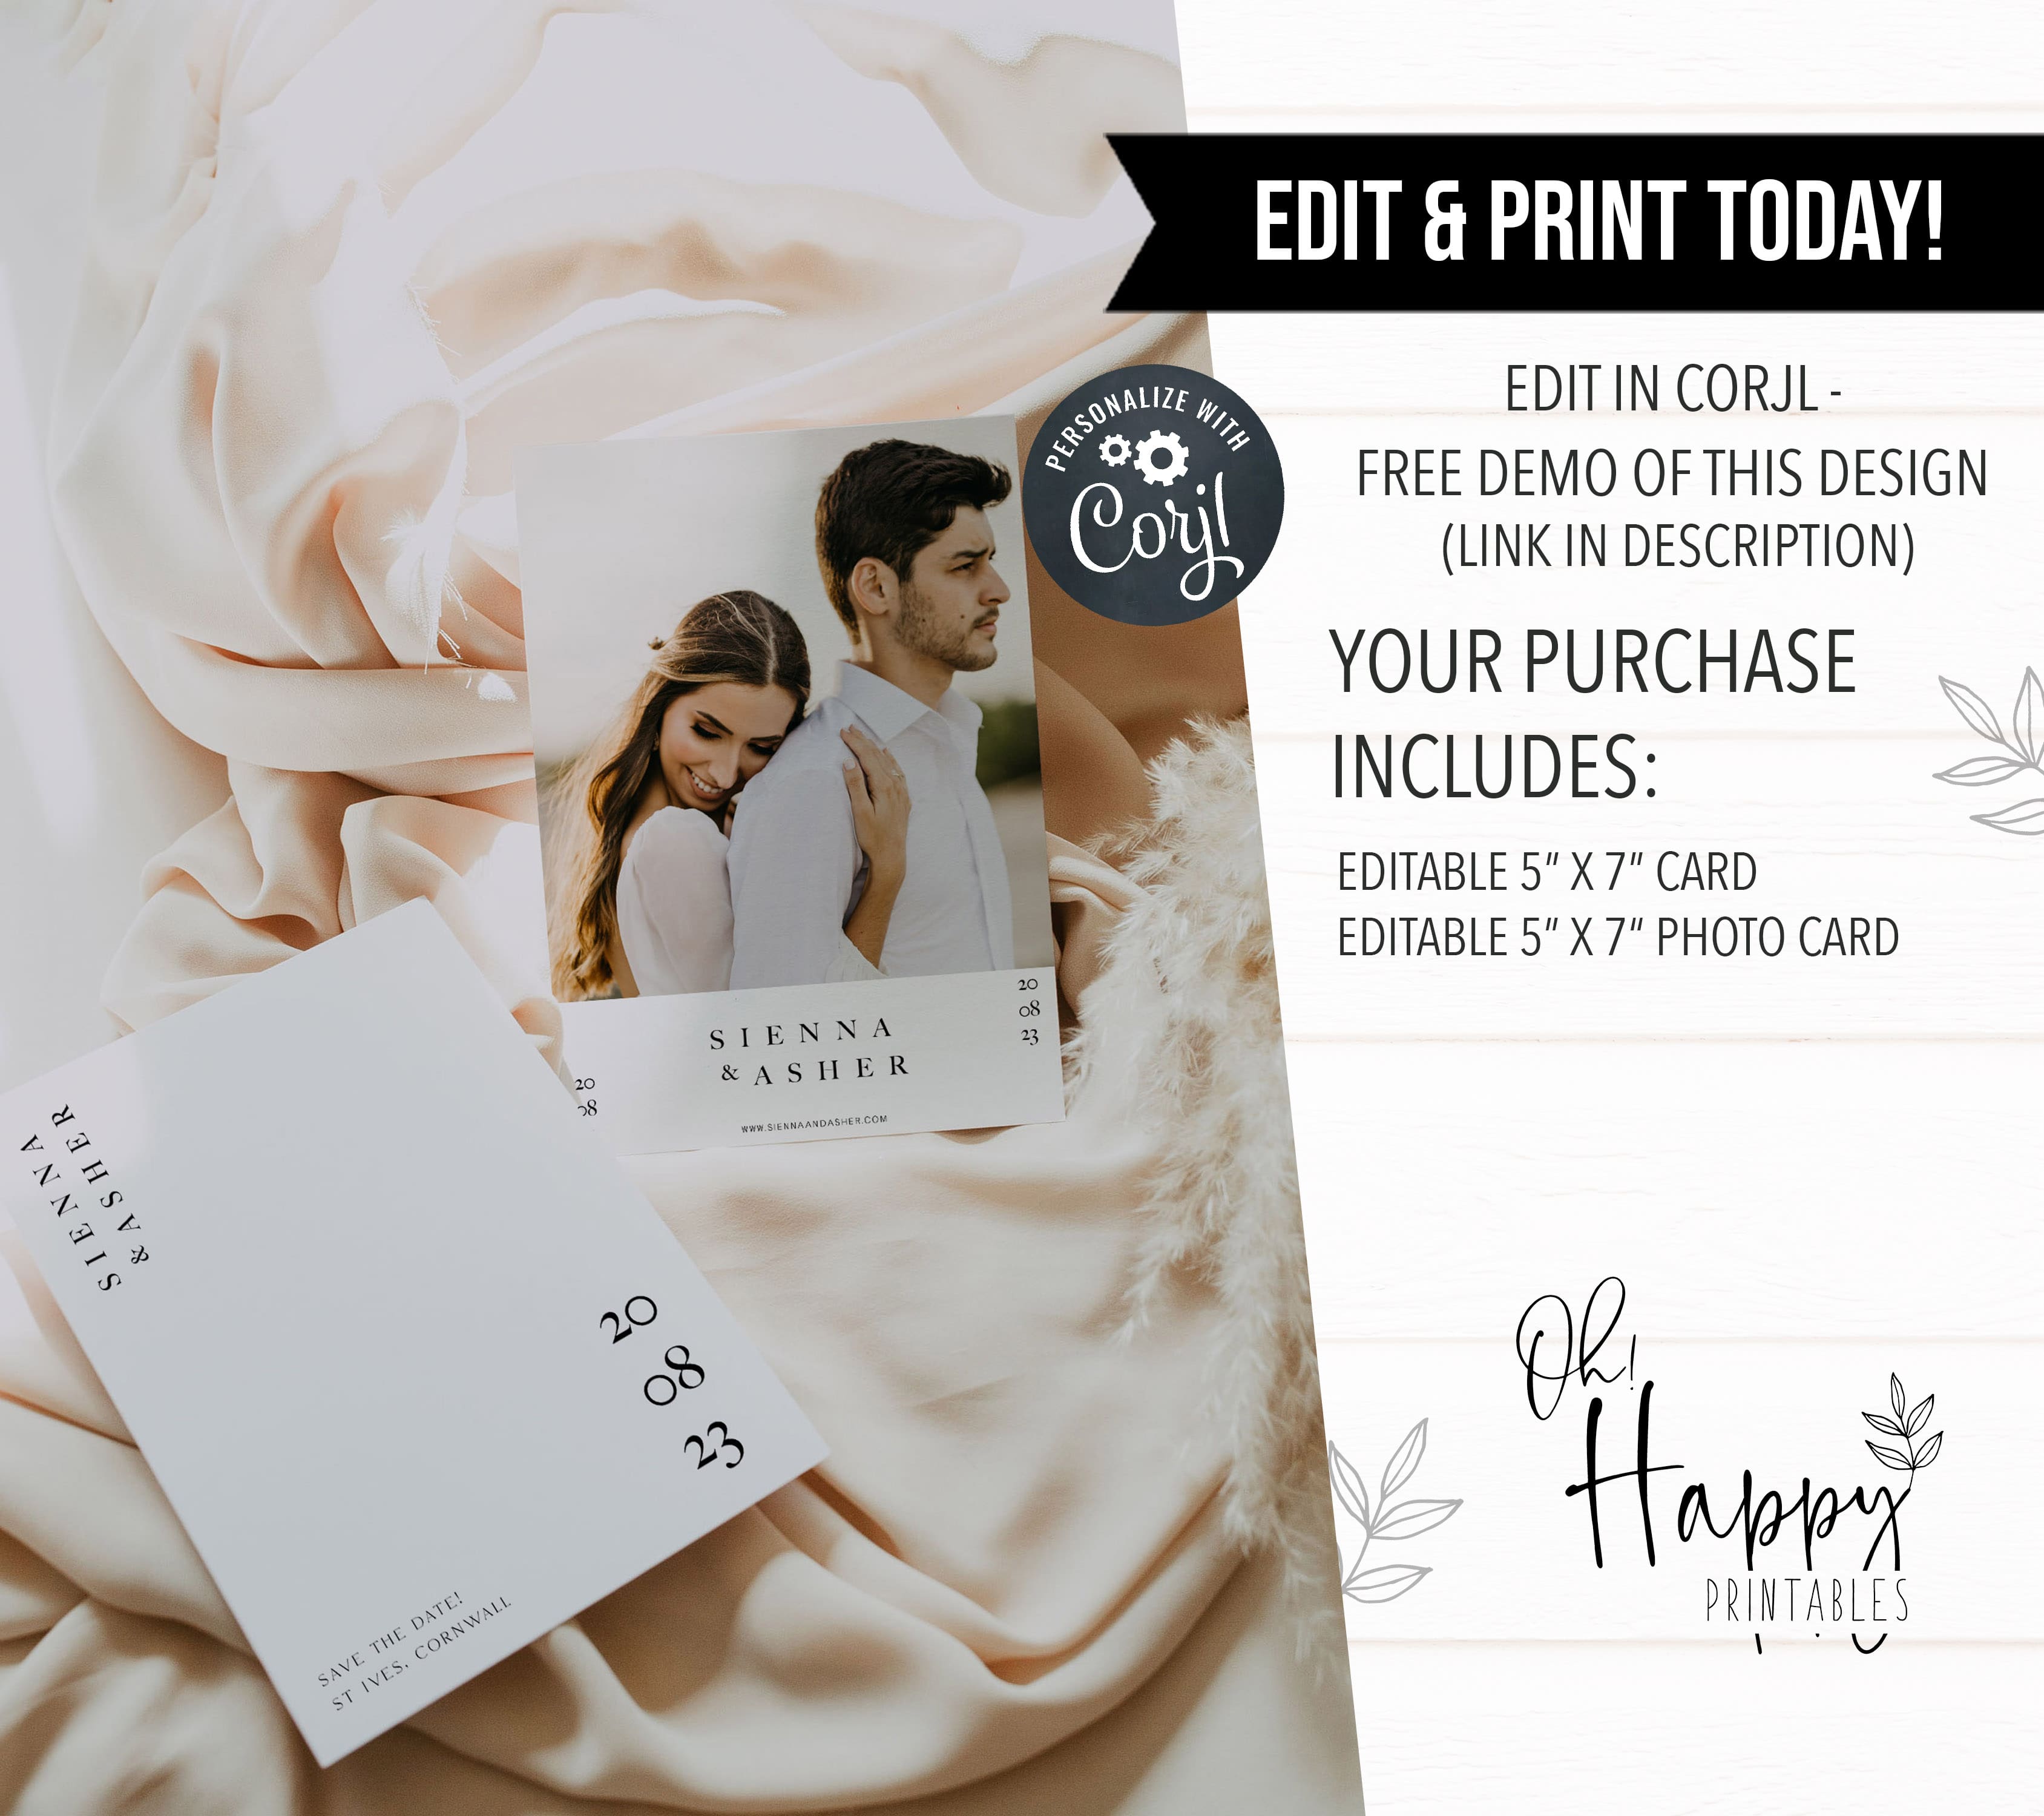 editable save the date, printable save the date, editable wedding invitation suite, editable wedding stationery, printable wedding stationery, modern wedding items, wedding save the dates